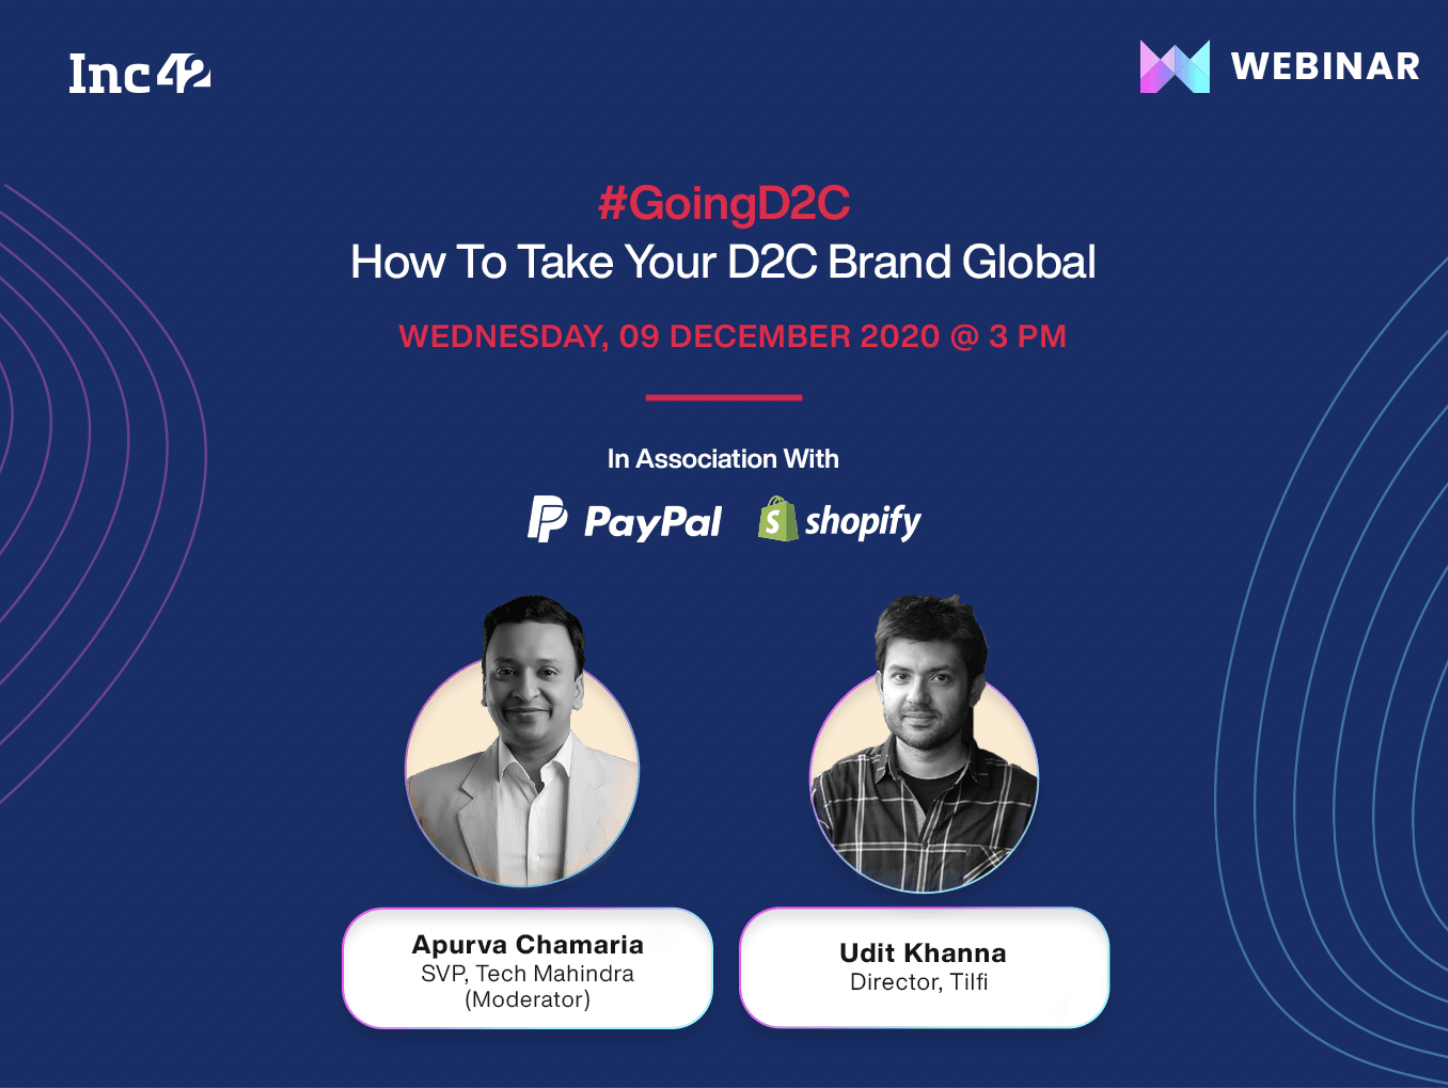 #GoingD2C Webinars: Register Now To Learn How To Take Your D2C Brand Global